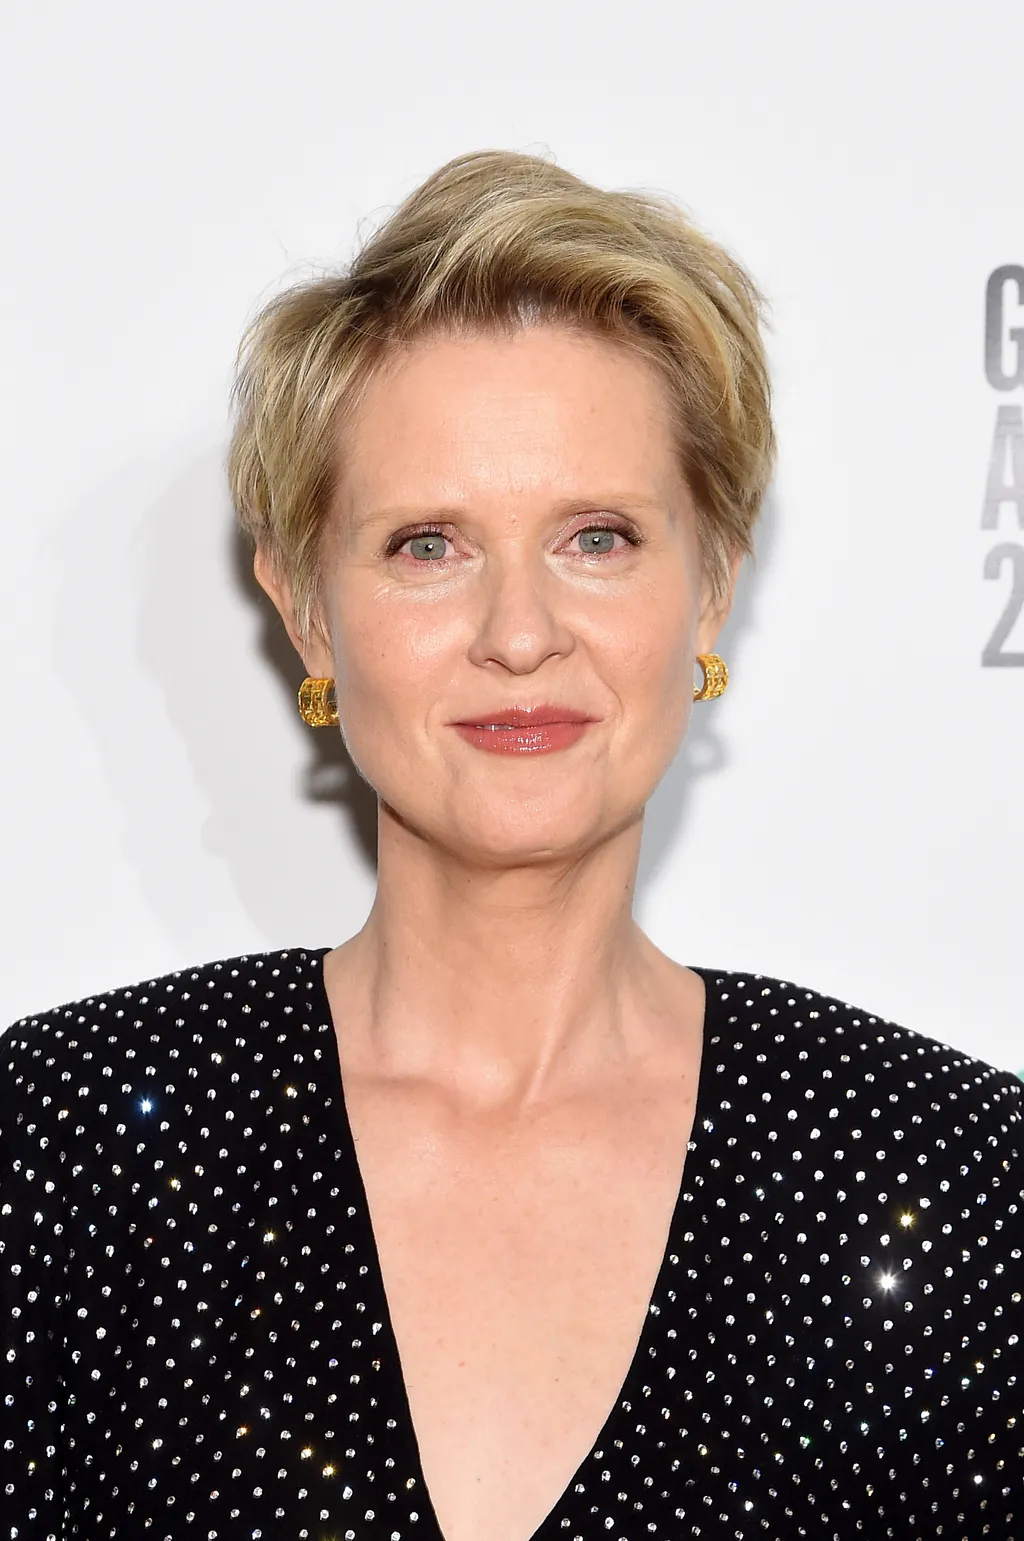 IFP's 28th Annual Gotham Independent Film Awards - Backstage GettyImageRank3 People VERTICAL Looking At Camera SMILING USA New York City Wall Street - Lower Manhattan One Person BACKSTAGE PORTRAIT Photography Cynthia Nixon Cipriani - Manhattan Arts Cultur